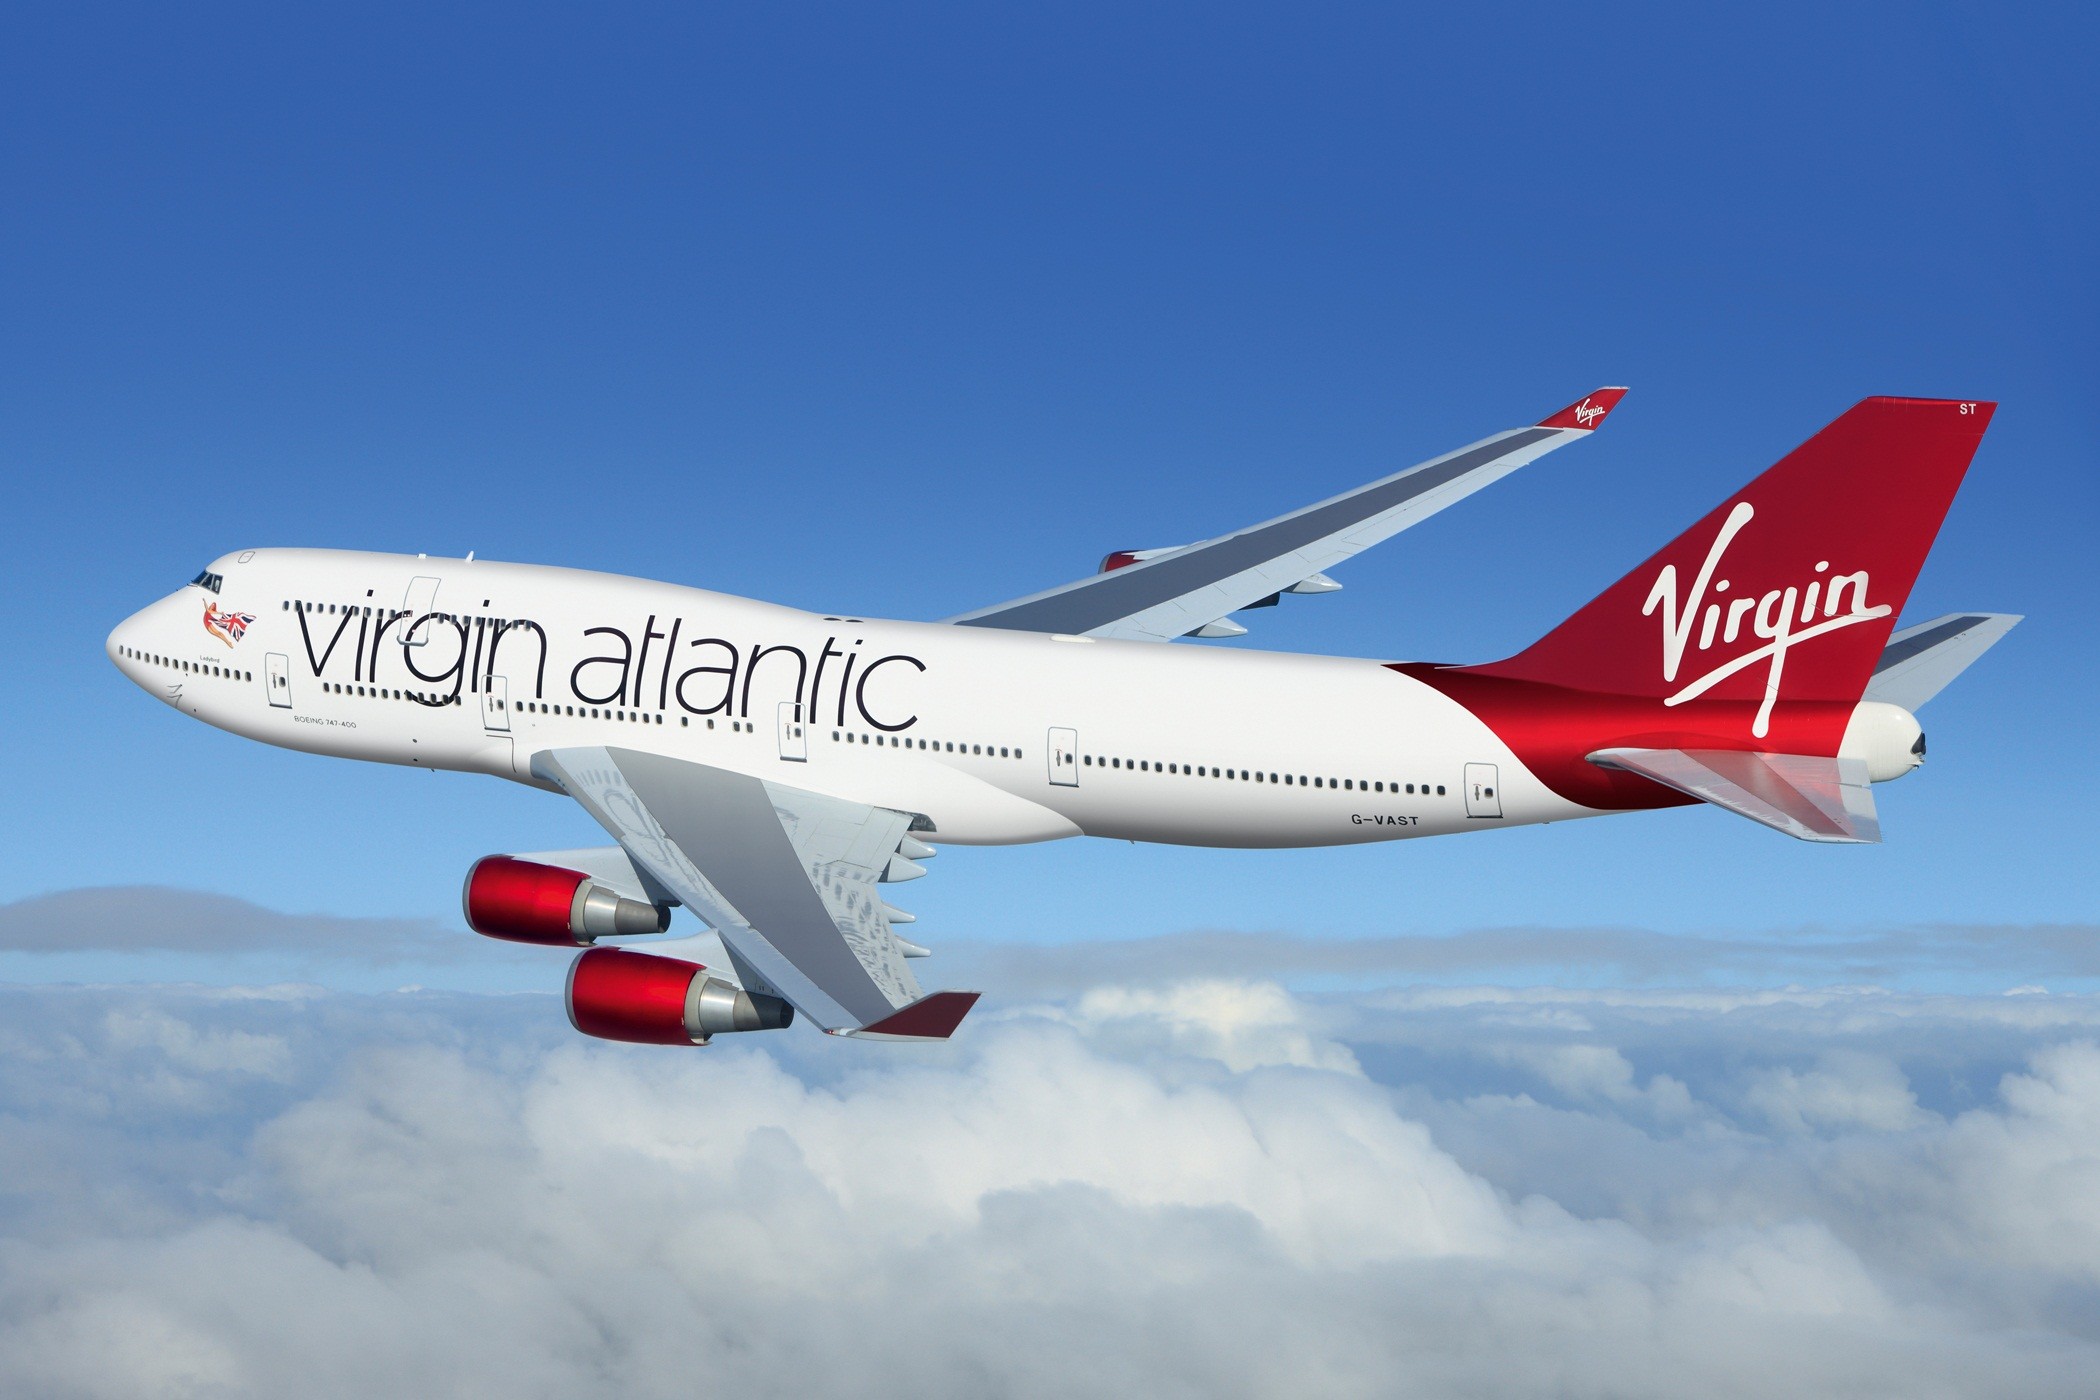 Virgin Atlantic to offer in-flight Wi-Fi on all 39 aircraft - Neowin